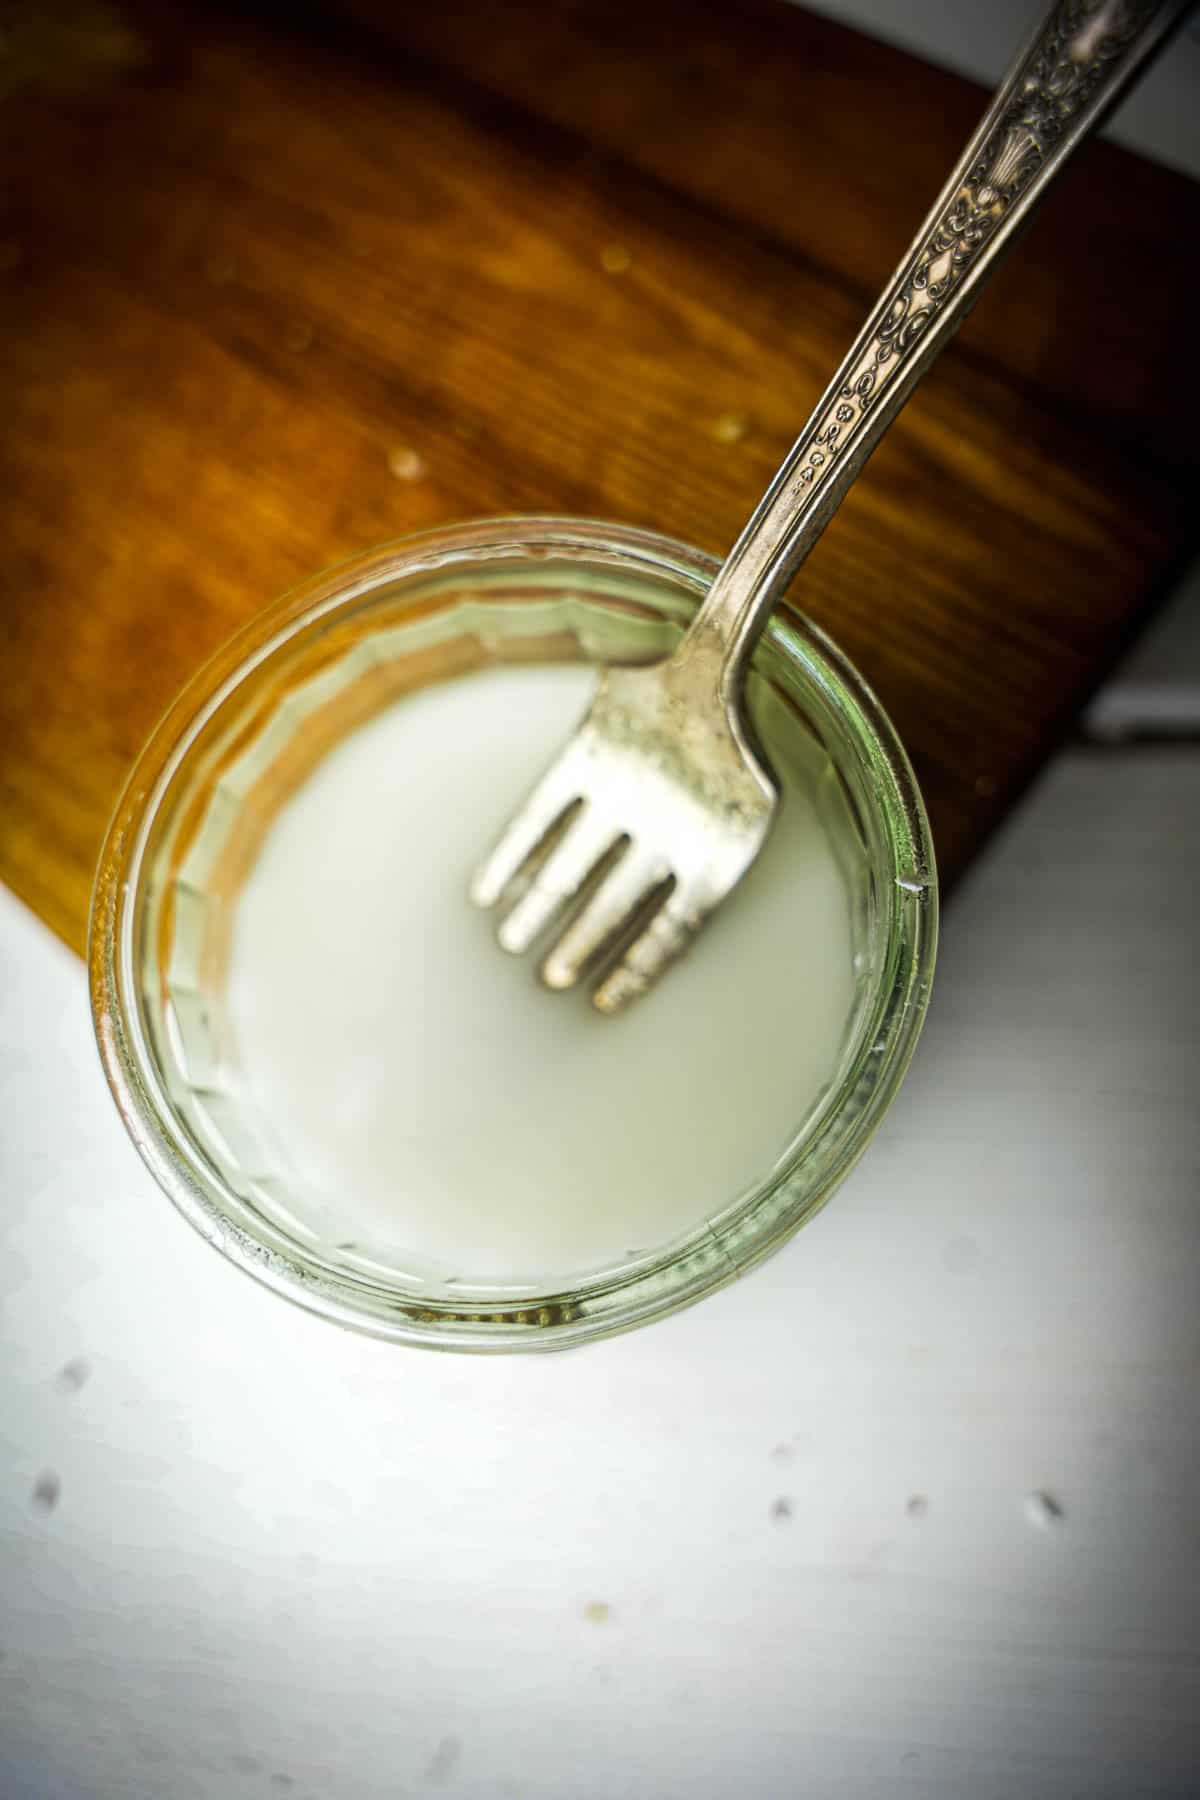 Cornstarch and water are mixed together using a fork in a small glass.